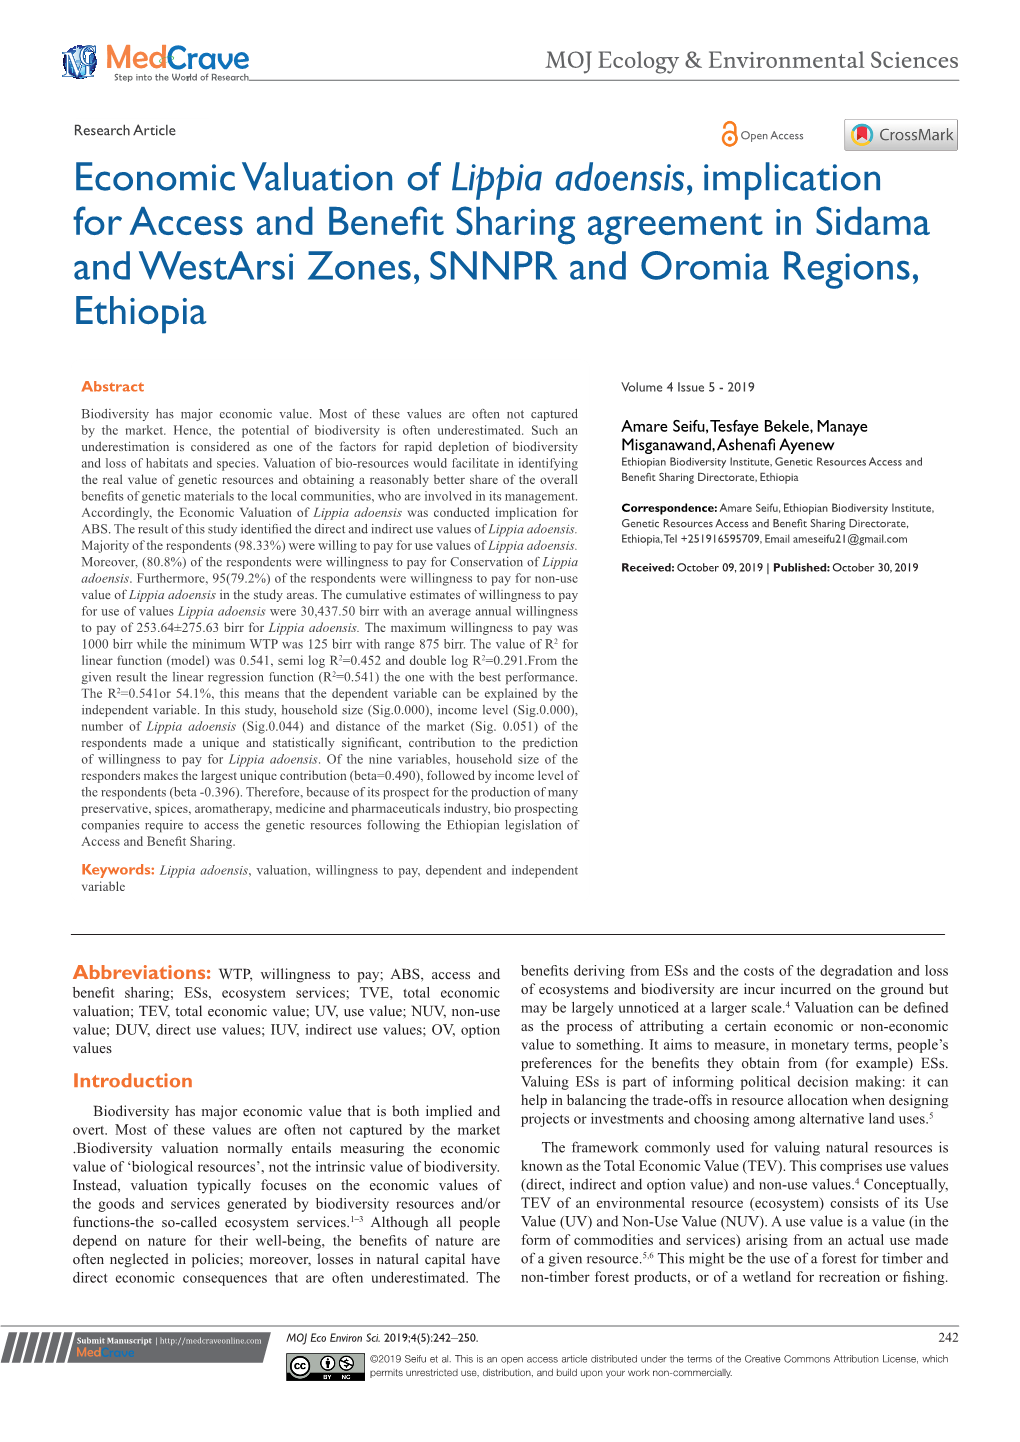 Lippia Adoensis, Implication for Access and Benefit Sharing Agreement in Sidama and Westarsi Zones, SNNPR and Oromia Regions, Ethiopia